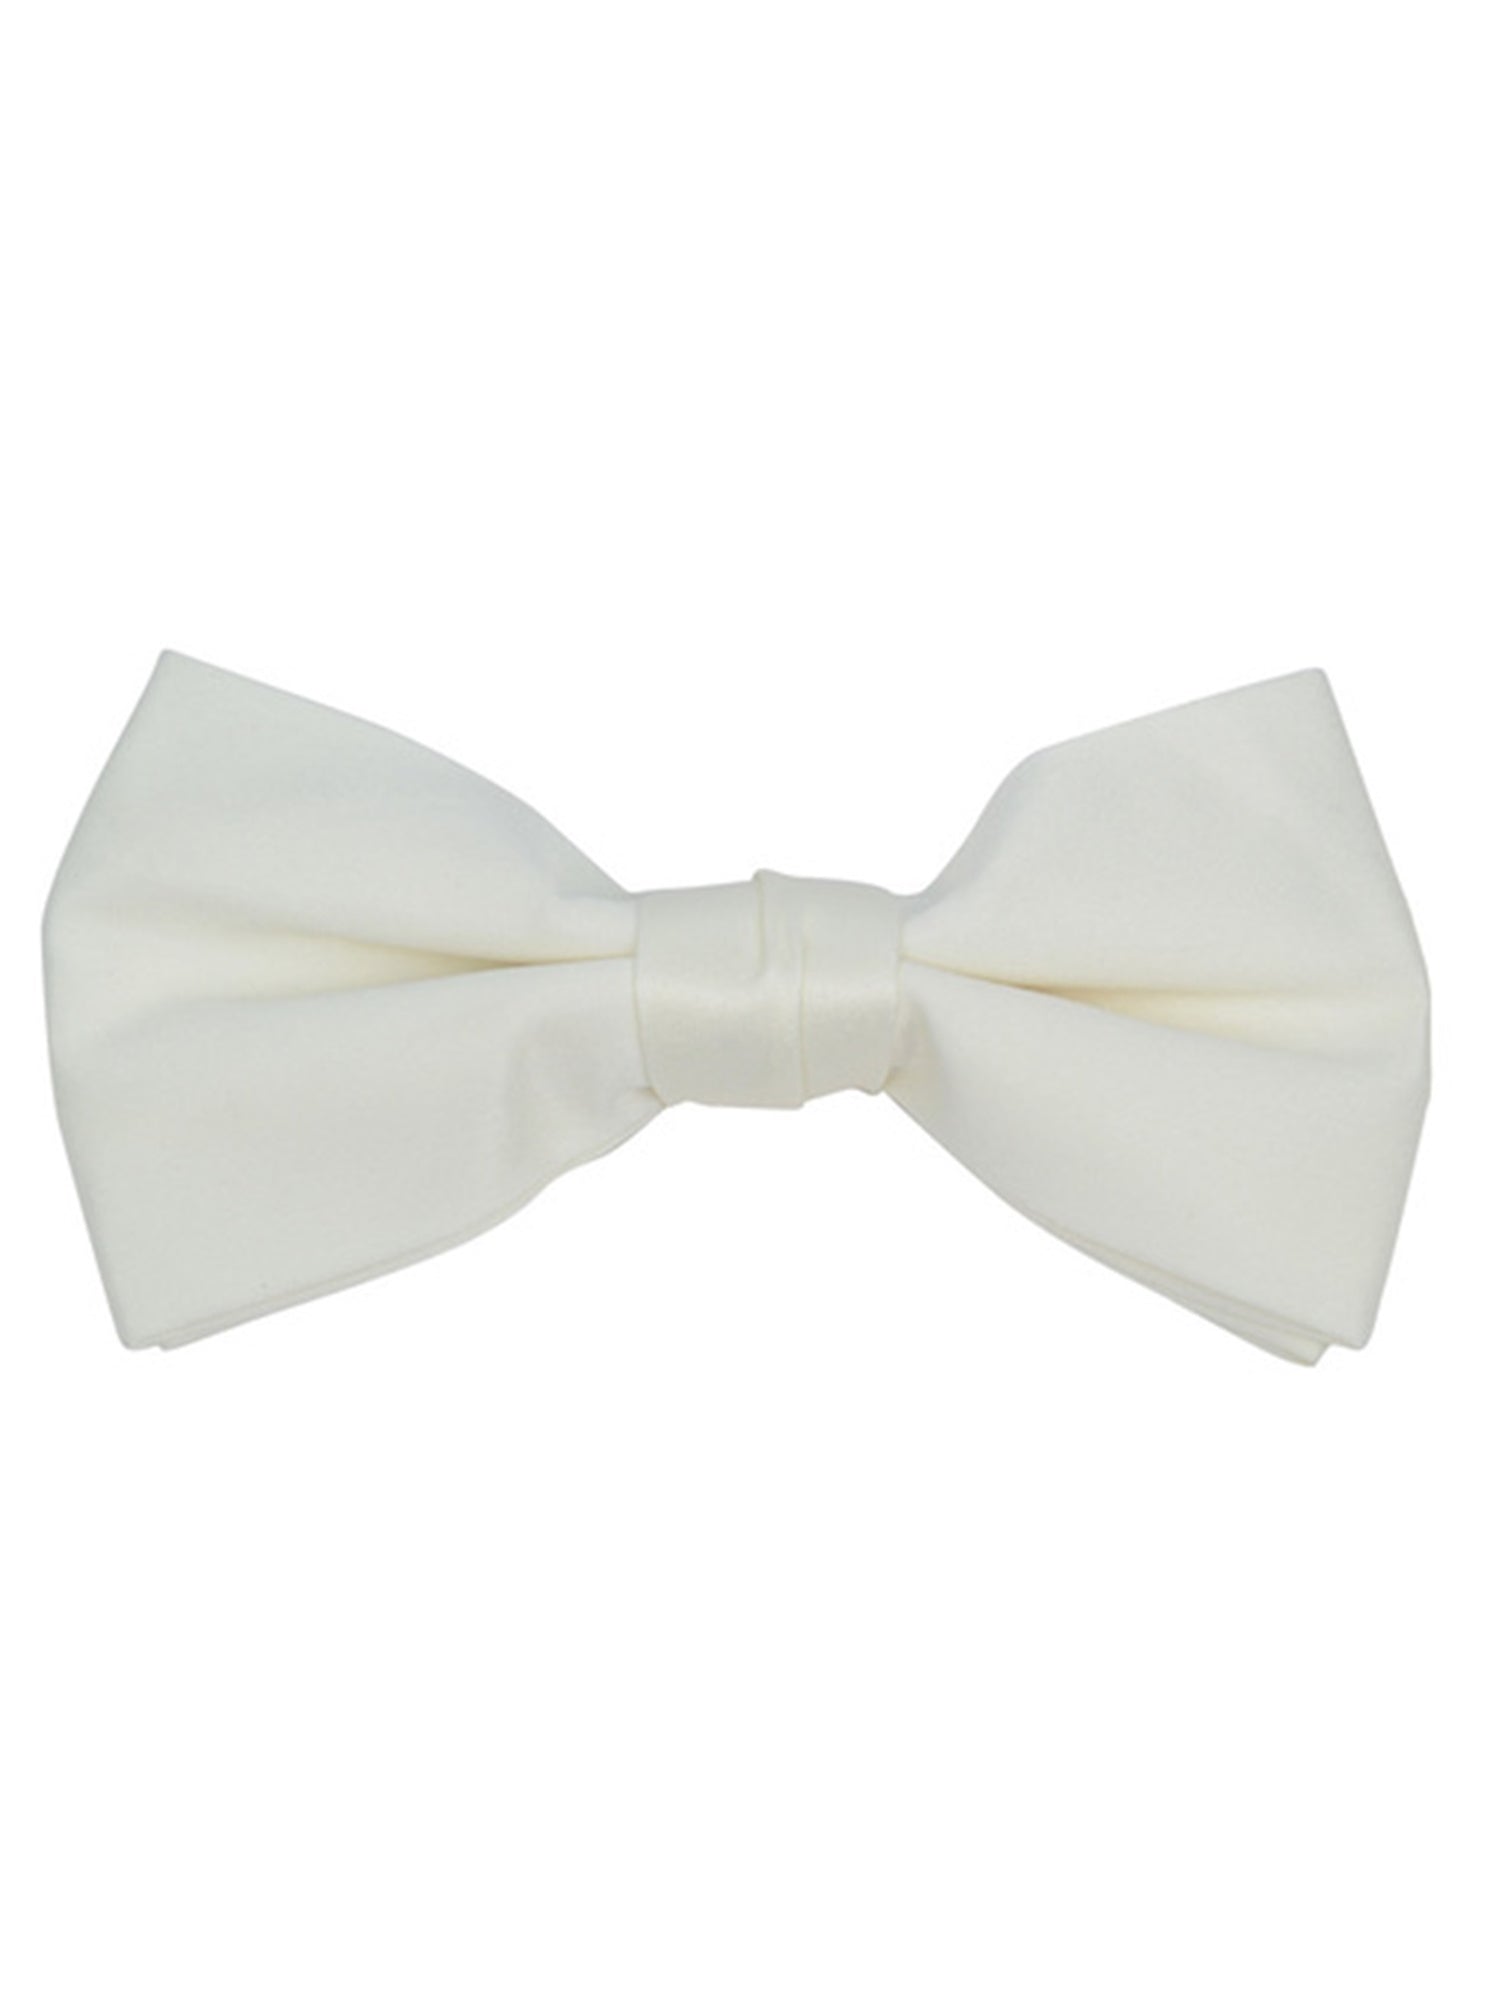 Young Boy's Pre-tied Clip On Bow Tie - Formal Tuxedo Solid Color Boy's Solid Color Bow Tie TheDapperTie Ivory One Size 